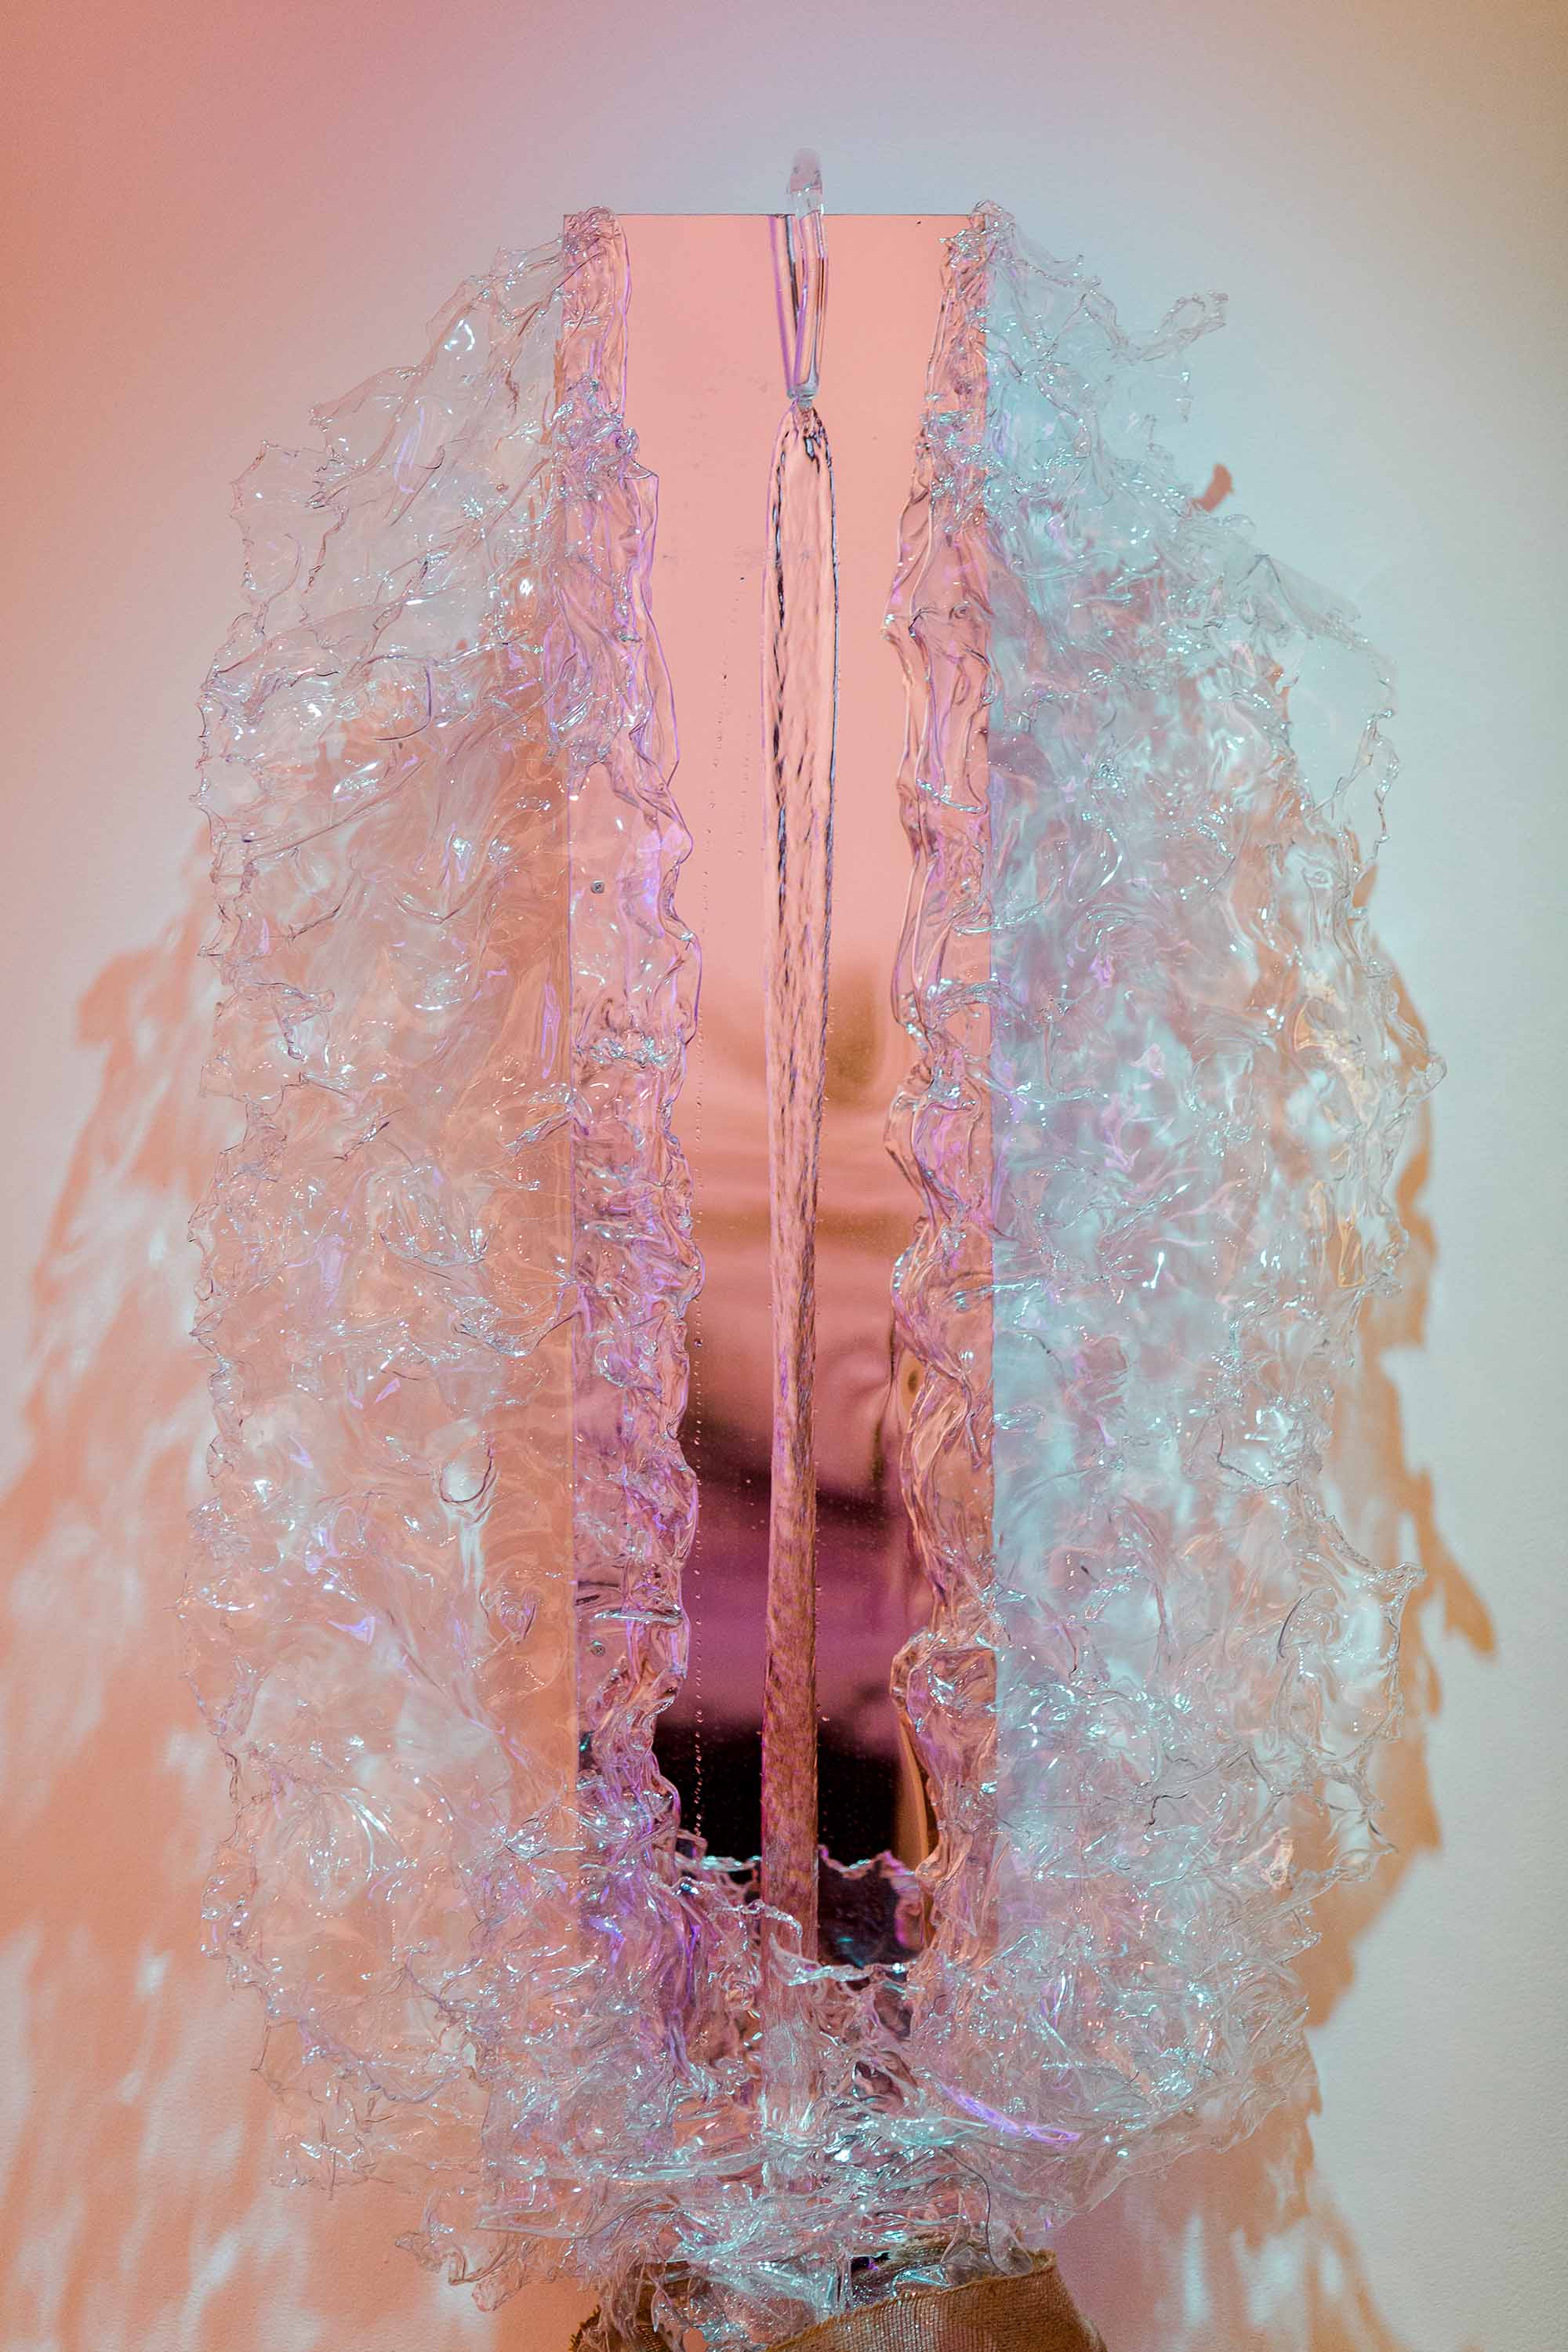 A sculpture resembling a splash of water around a mirror, with water flowing through.